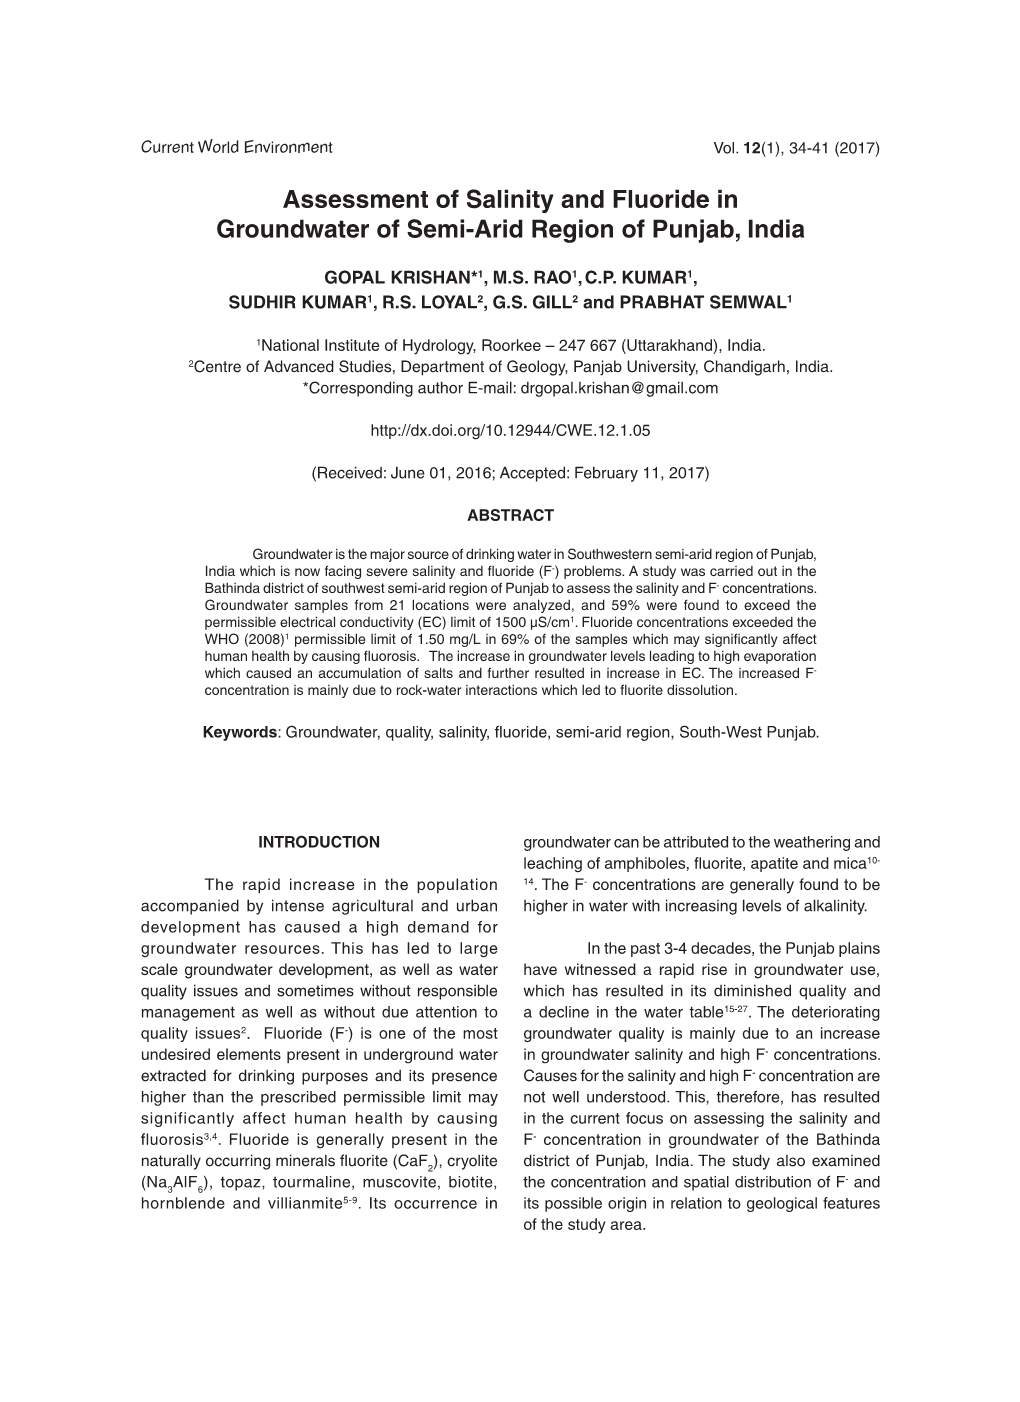 Assessment of Salinity and Fluoride in Groundwater of Semi-Arid Region of Punjab, India